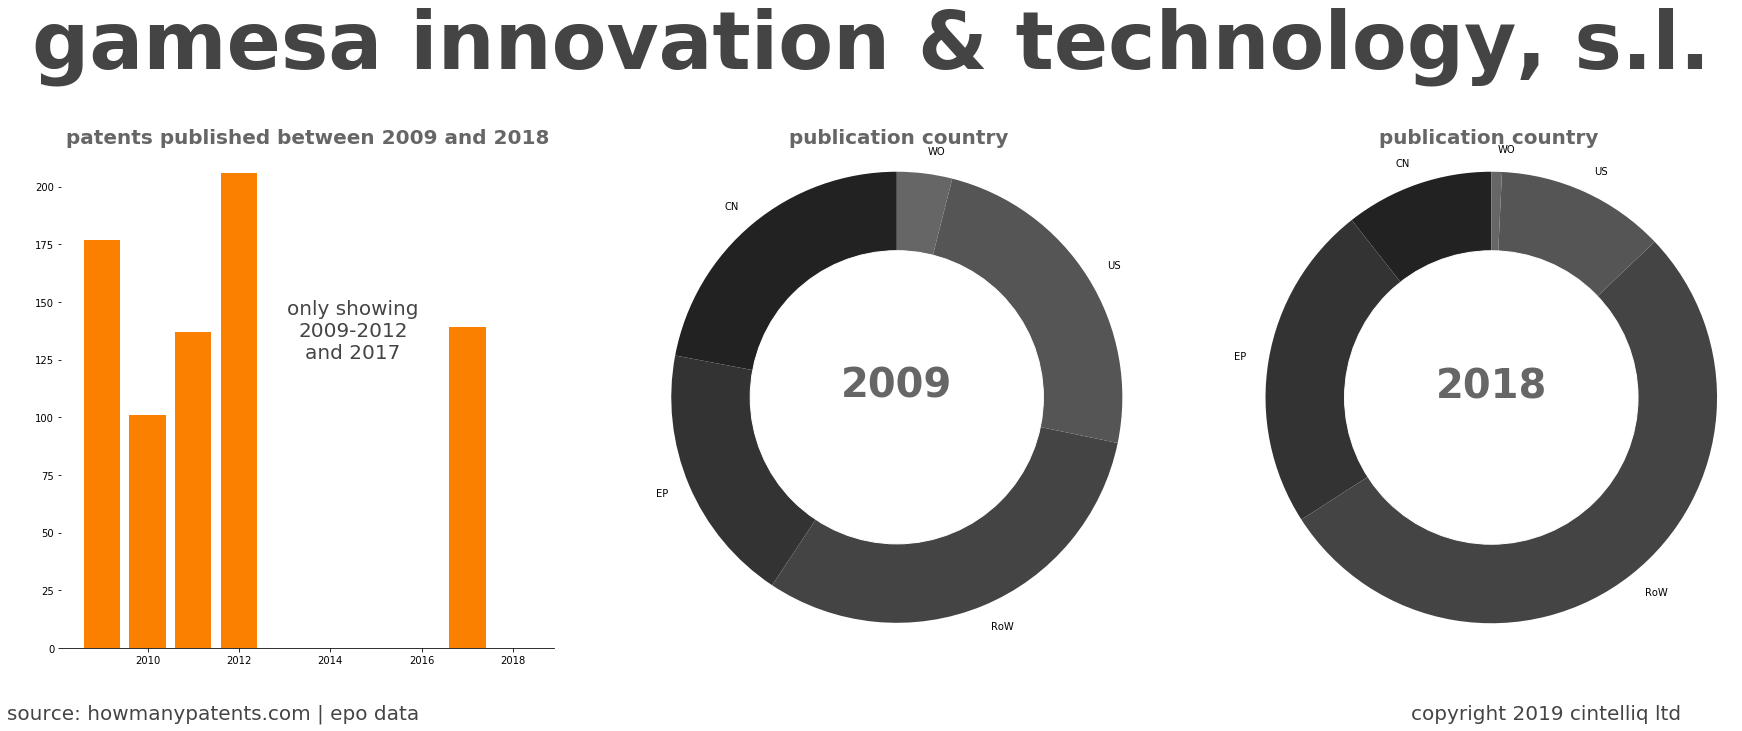 summary of patents for Gamesa Innovation & Technology, S.L.